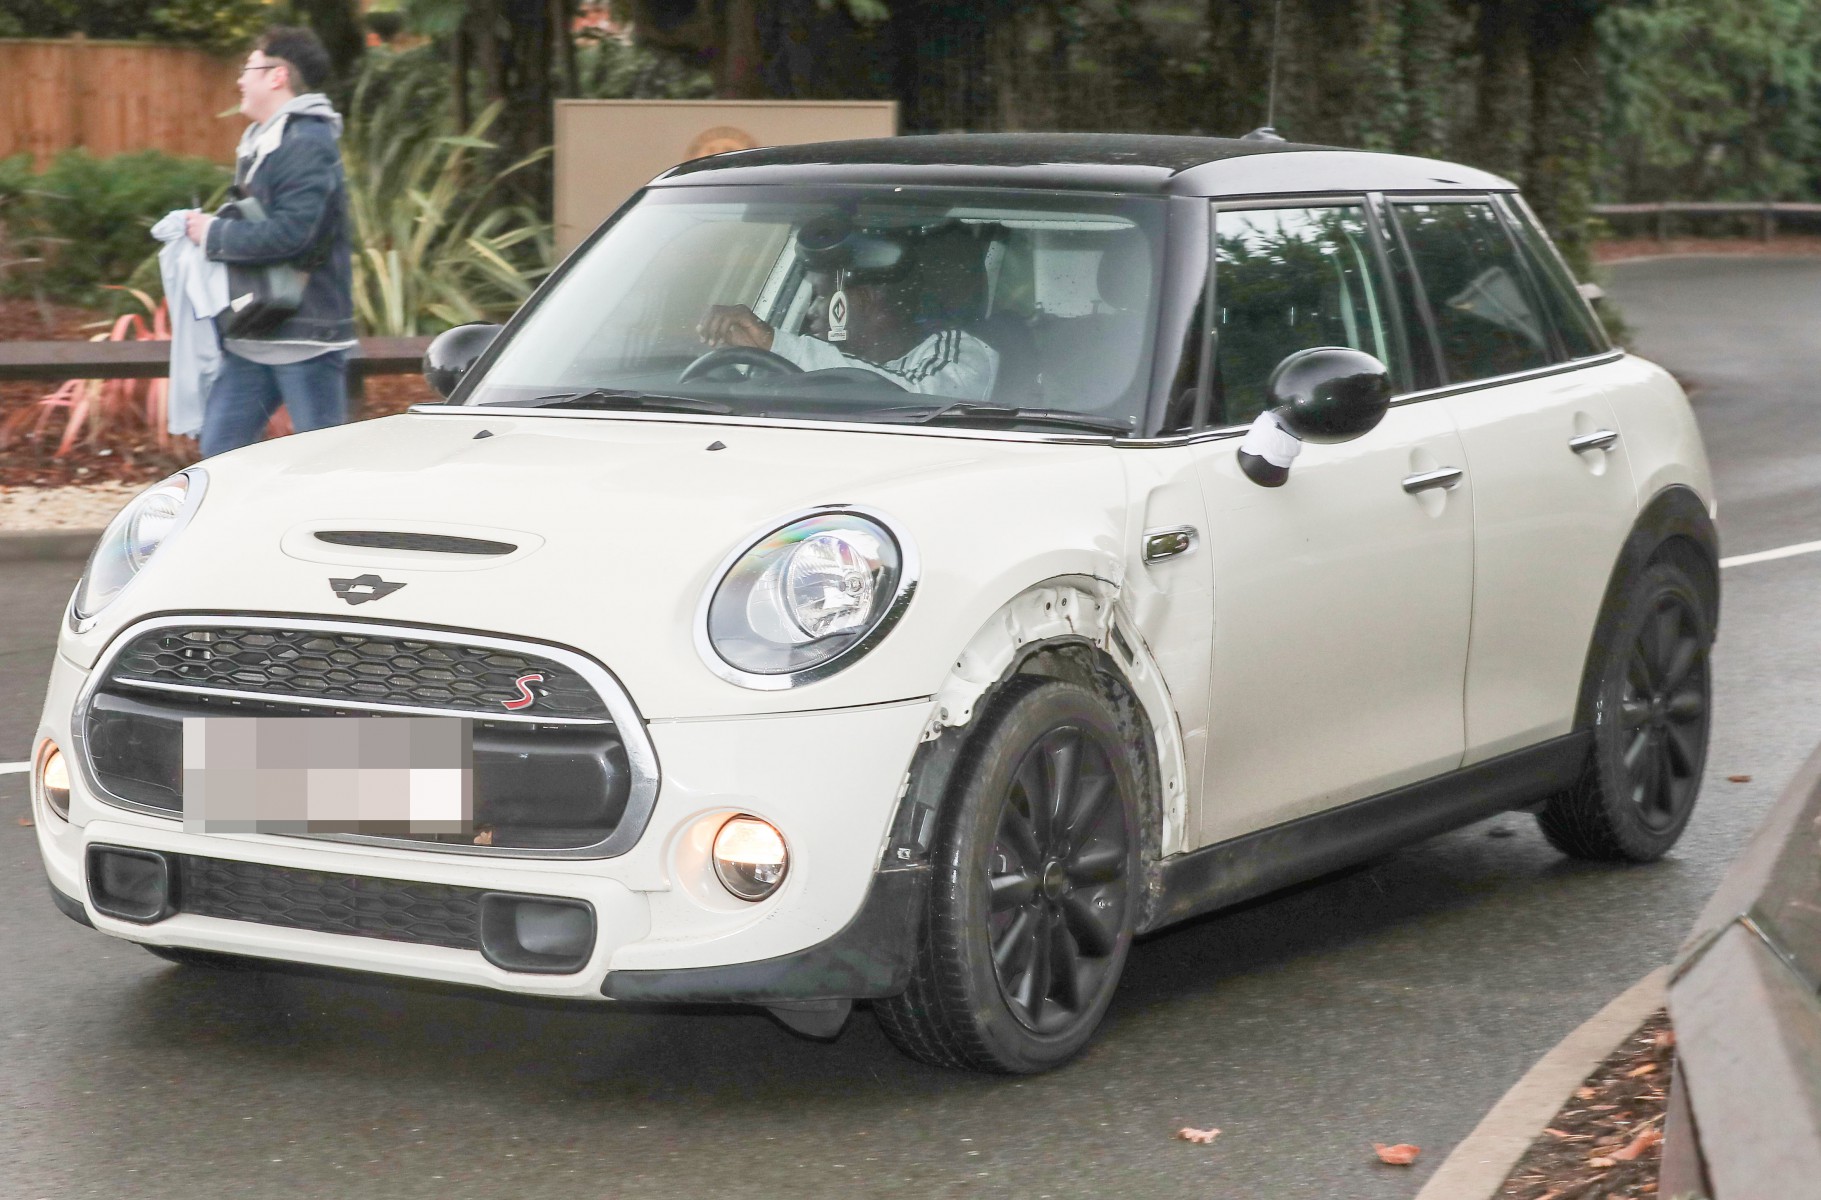 , NGolo Kante still drives the same Mini hes owned since signing for Leicester in 2015, and its now worth just 10,345